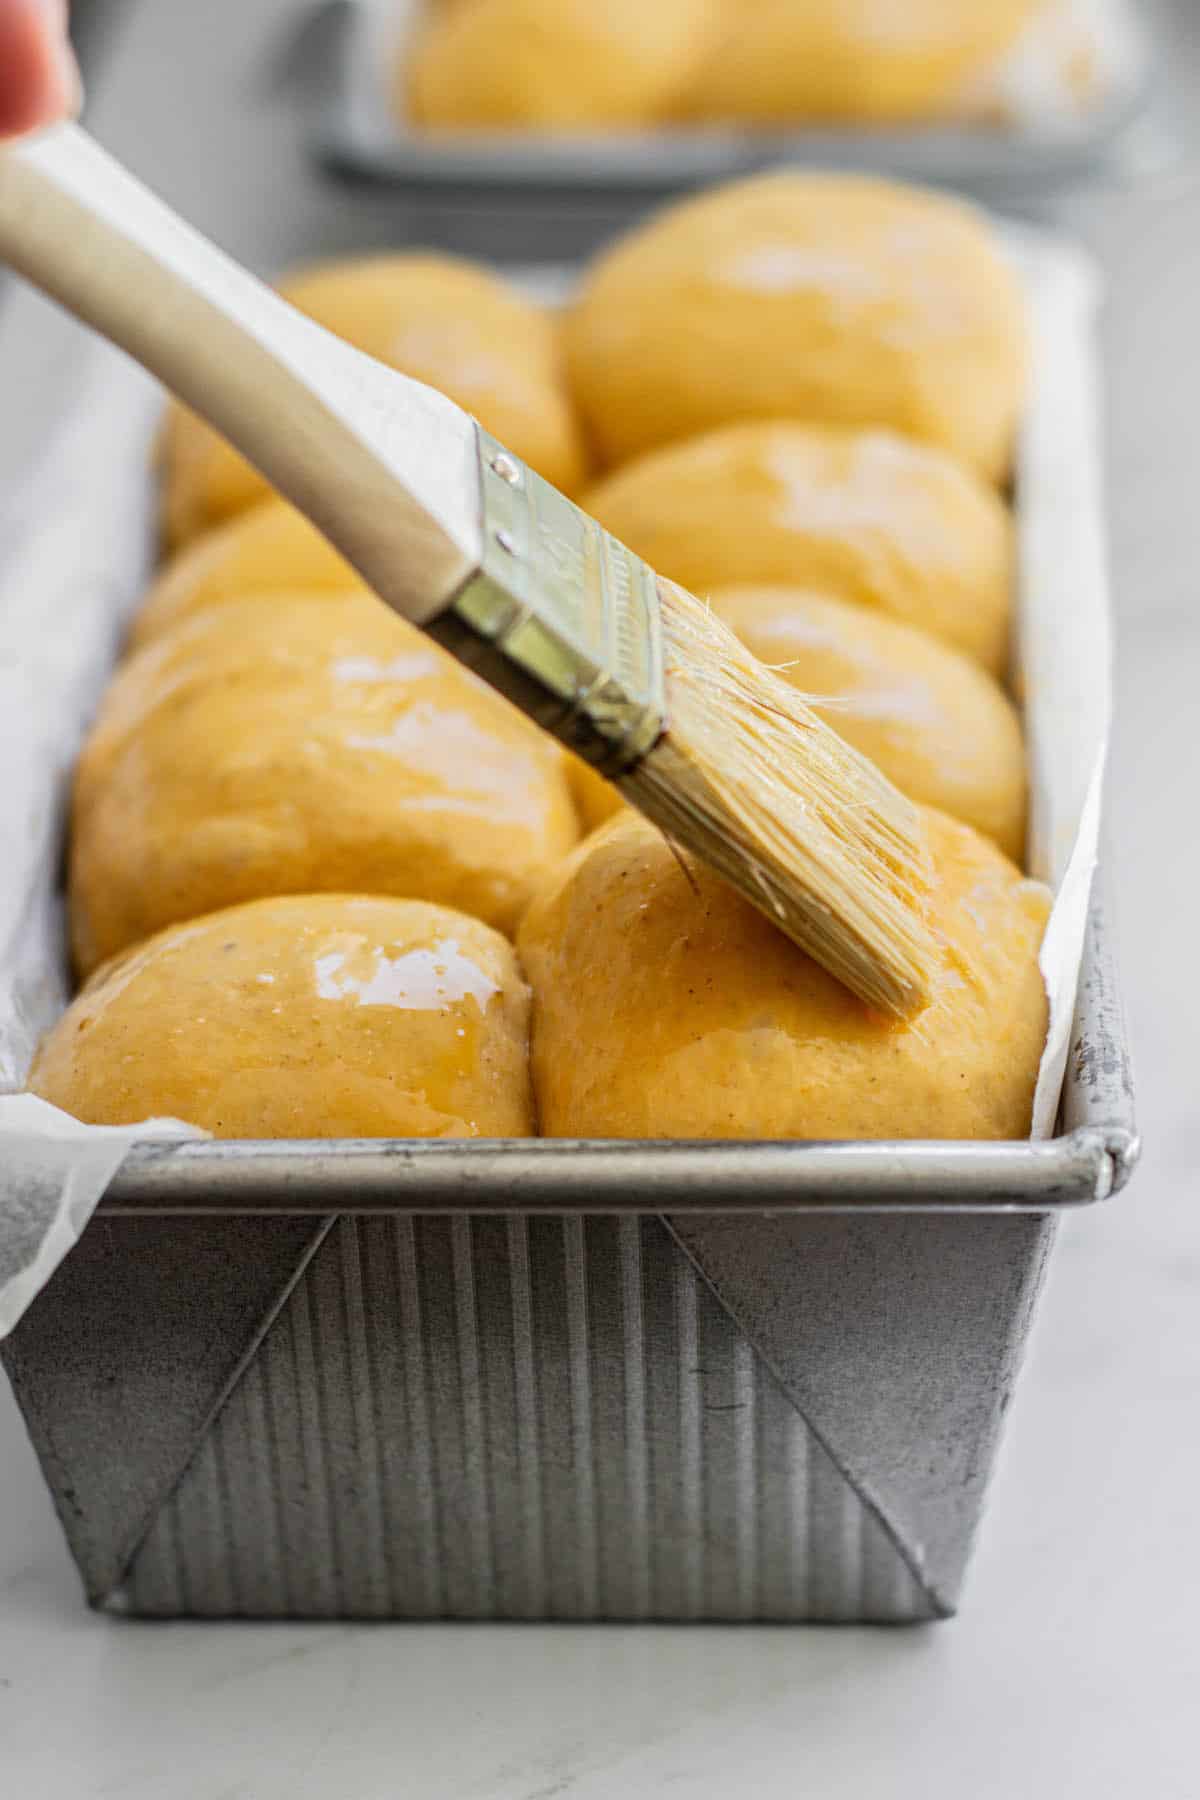 risen golden rolls in a metal baking tin being brushed with egg wash using a pastry brush.